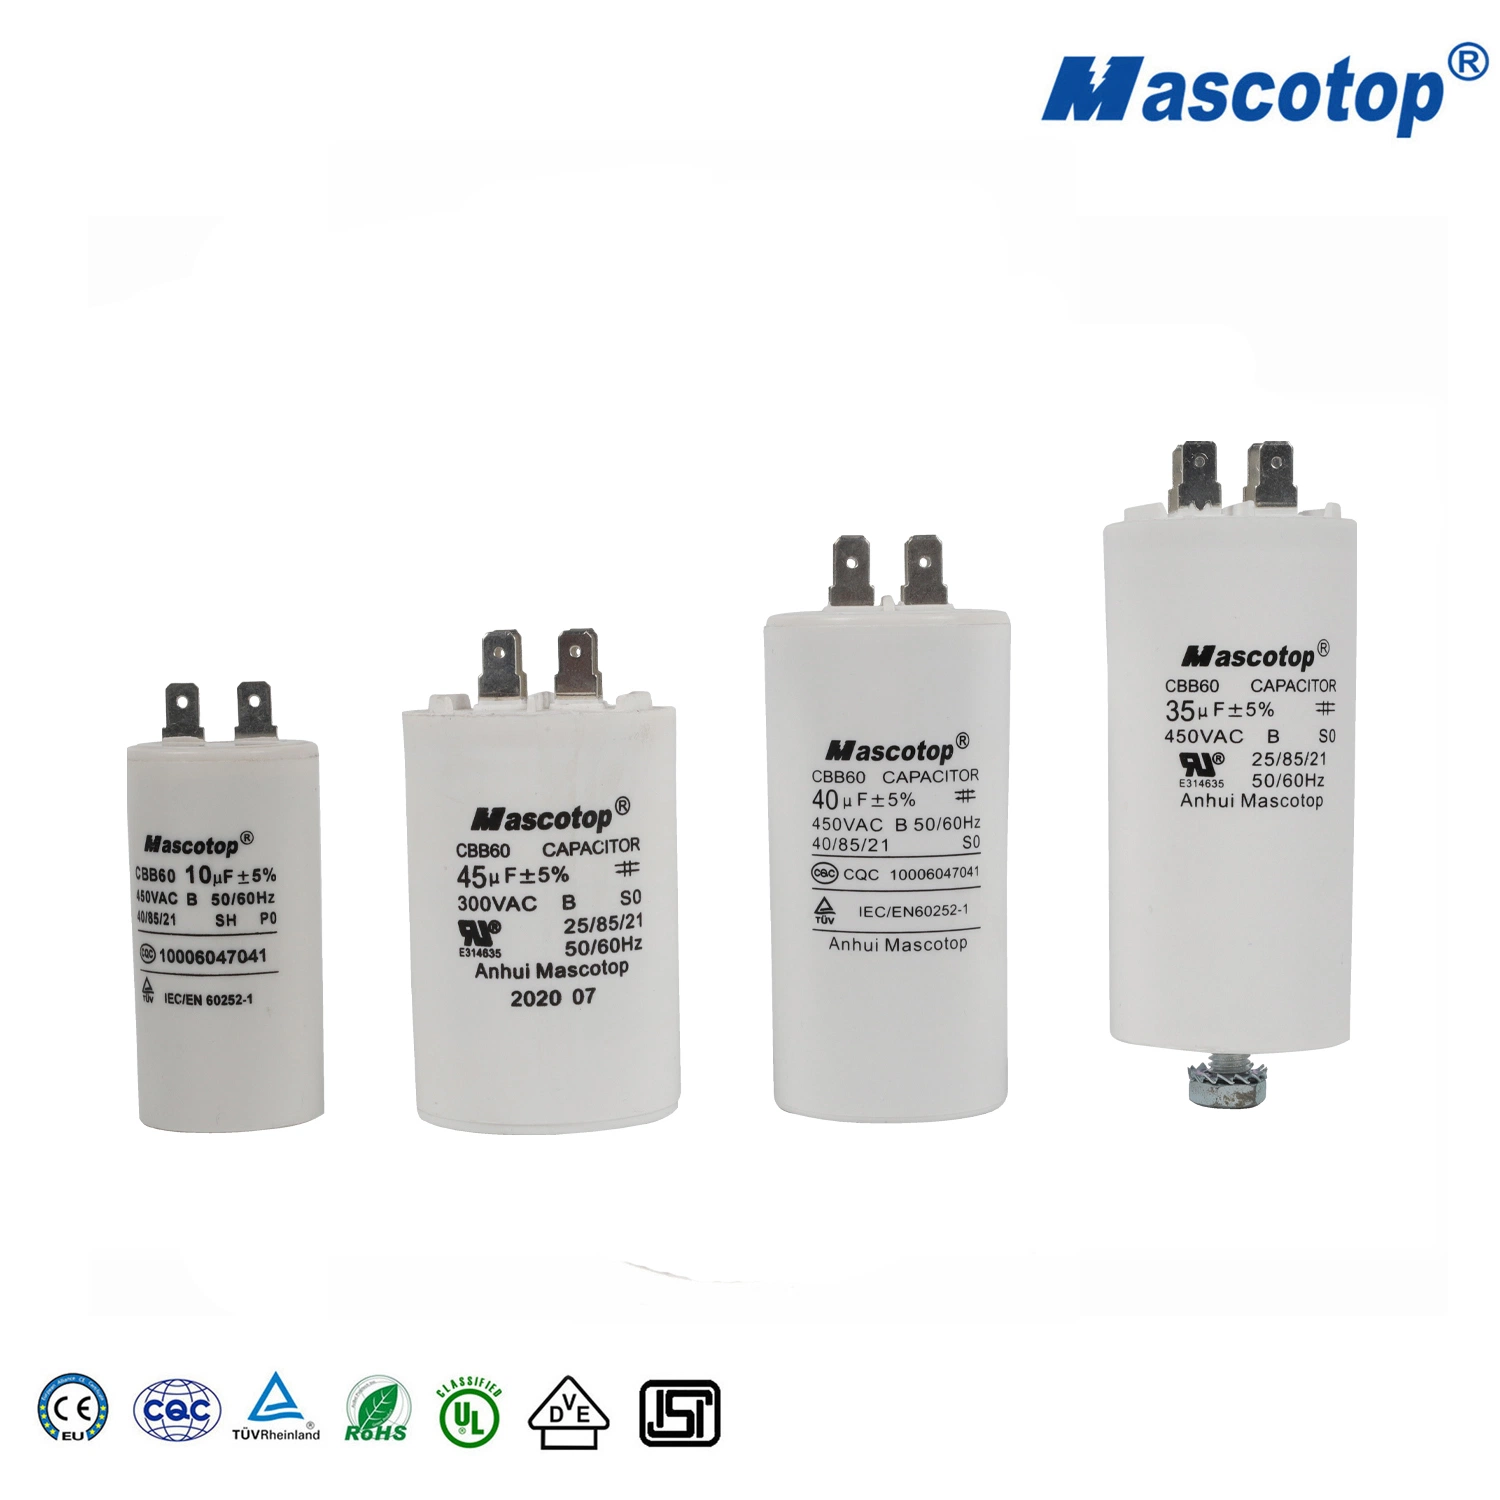 Mascotop Affordable Capacitor with Wire and Pins Type